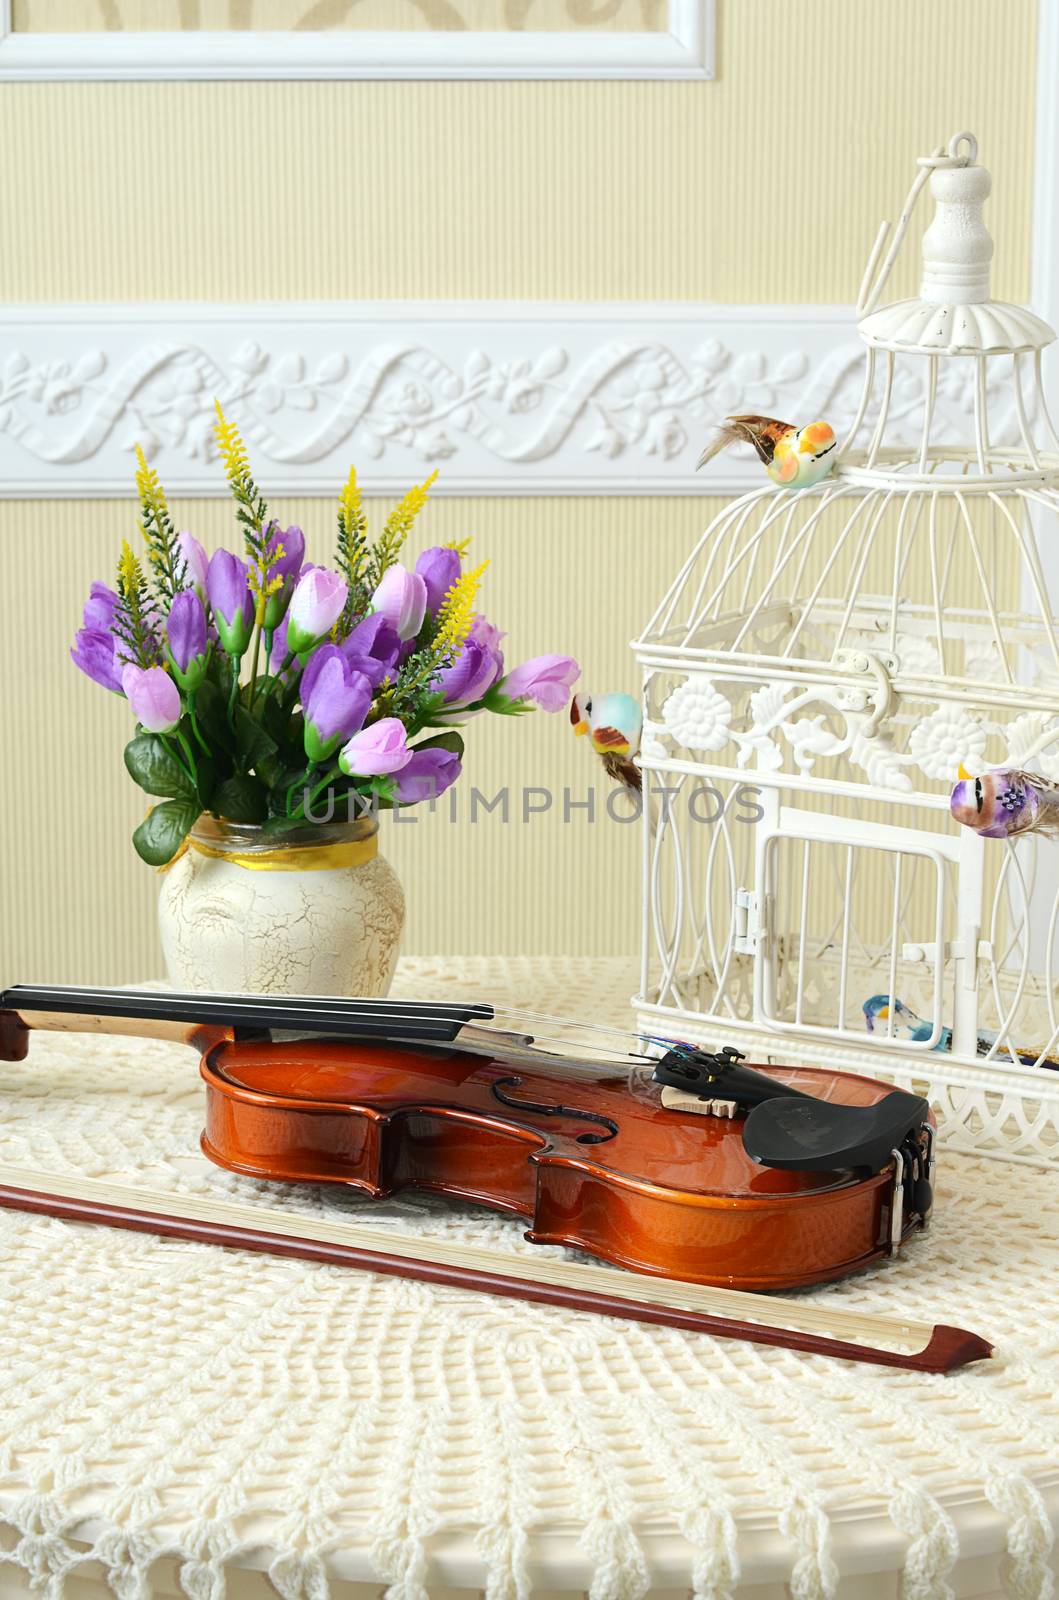 The violin on the table close up